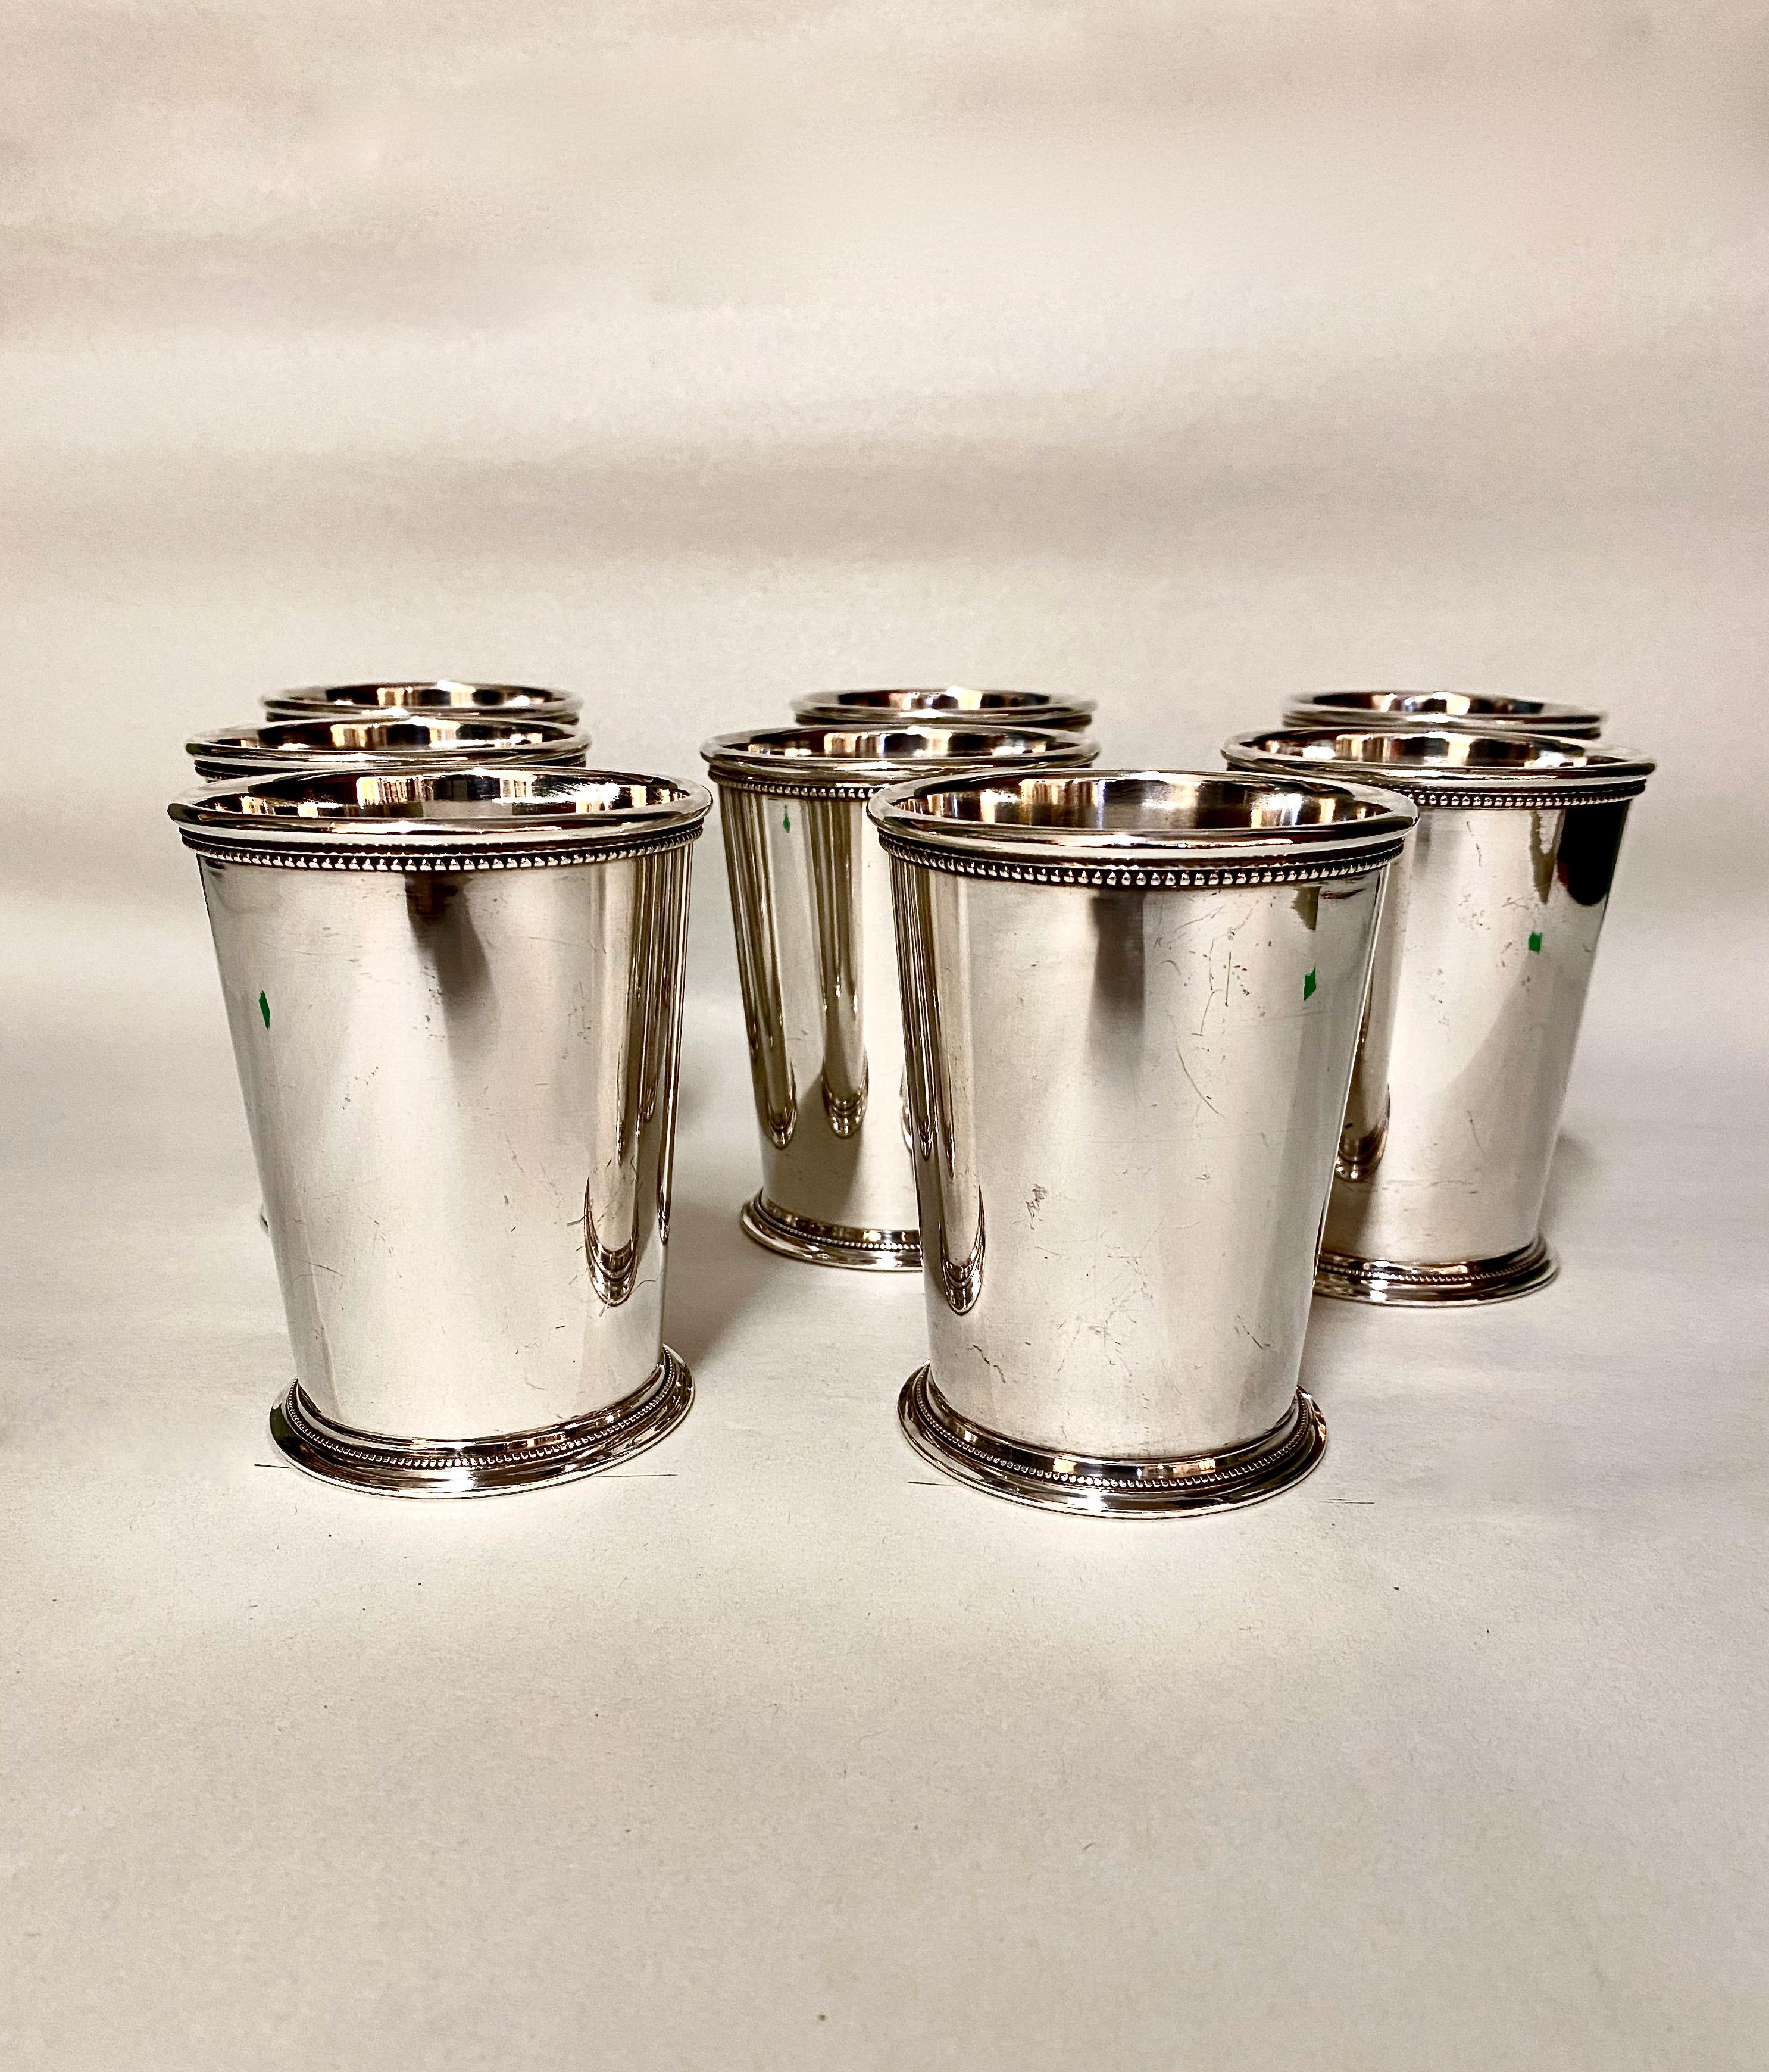 This is a wonderful set of 8 English-made mid-20th century mint julep cups. The heavy silver plate is in overall very good condition with hints of use. The rims and feet of the cups are detailed in beading and banding--both marks of quality. The